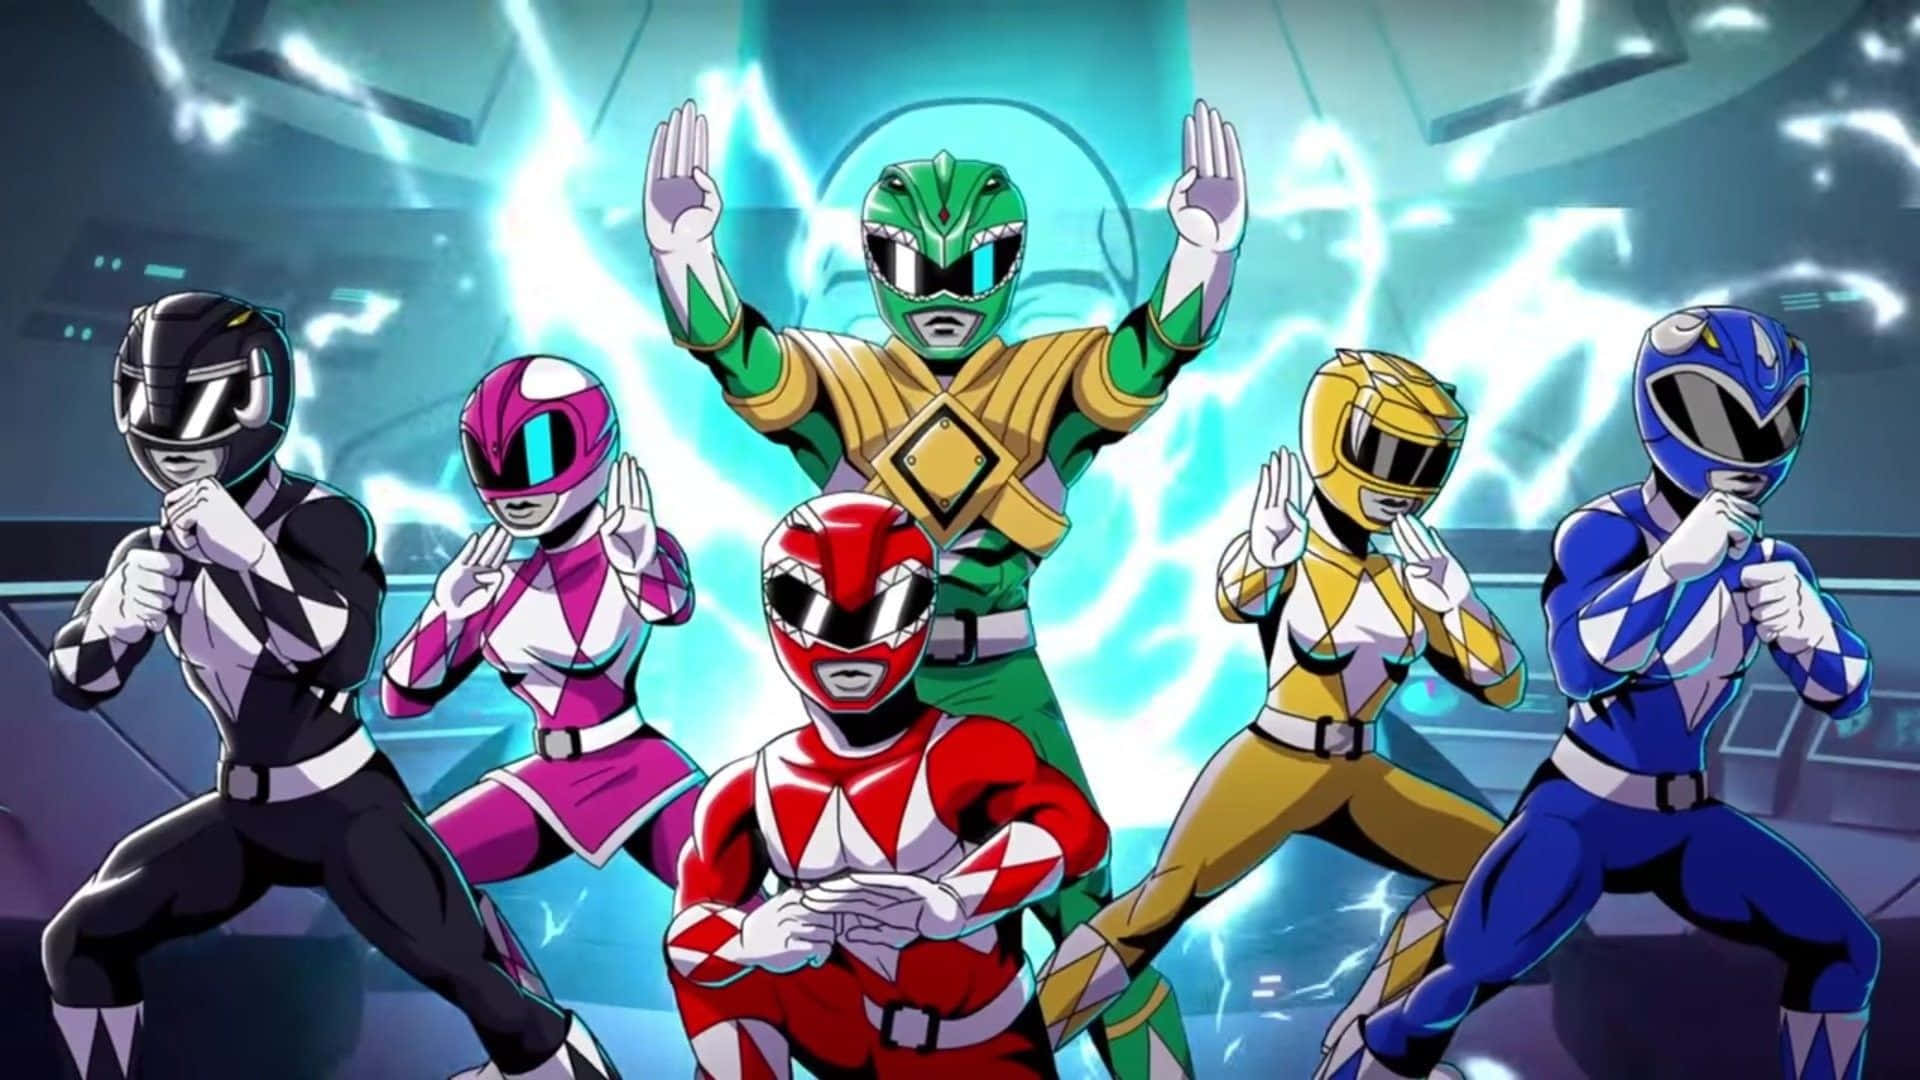 Power Rangers ready for action in a dynamic pose